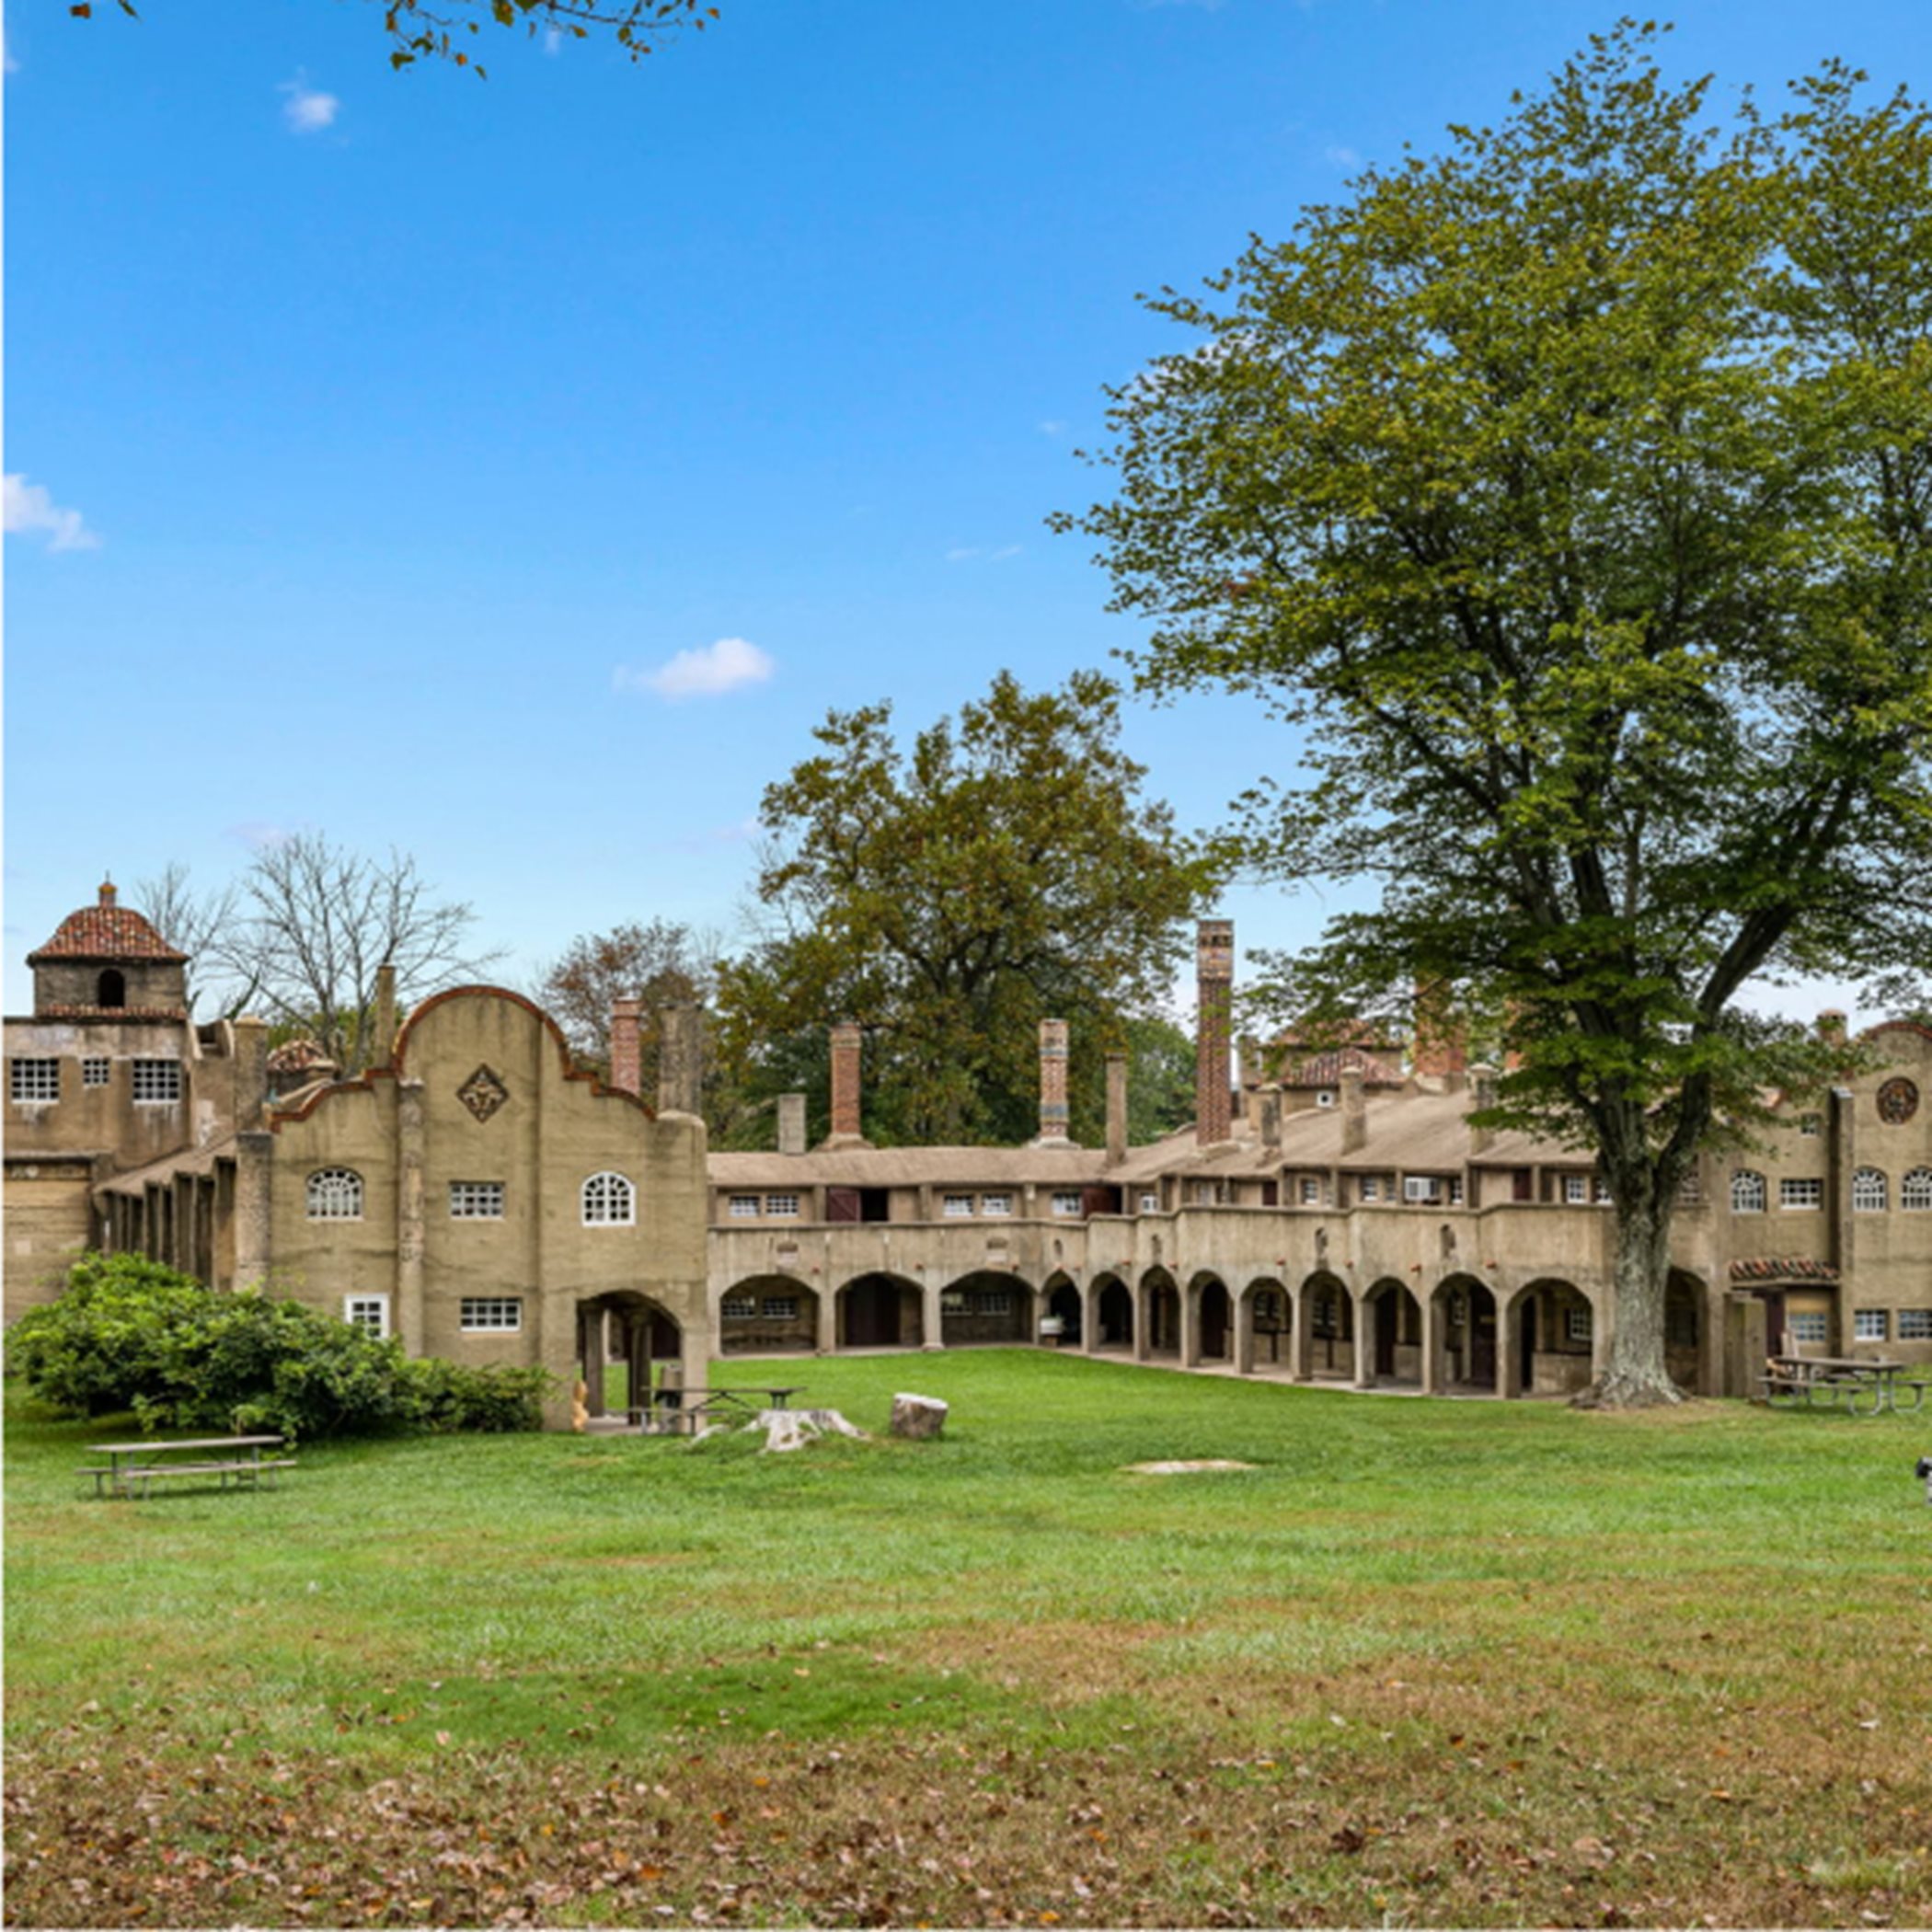 the historic Fonthill Castle